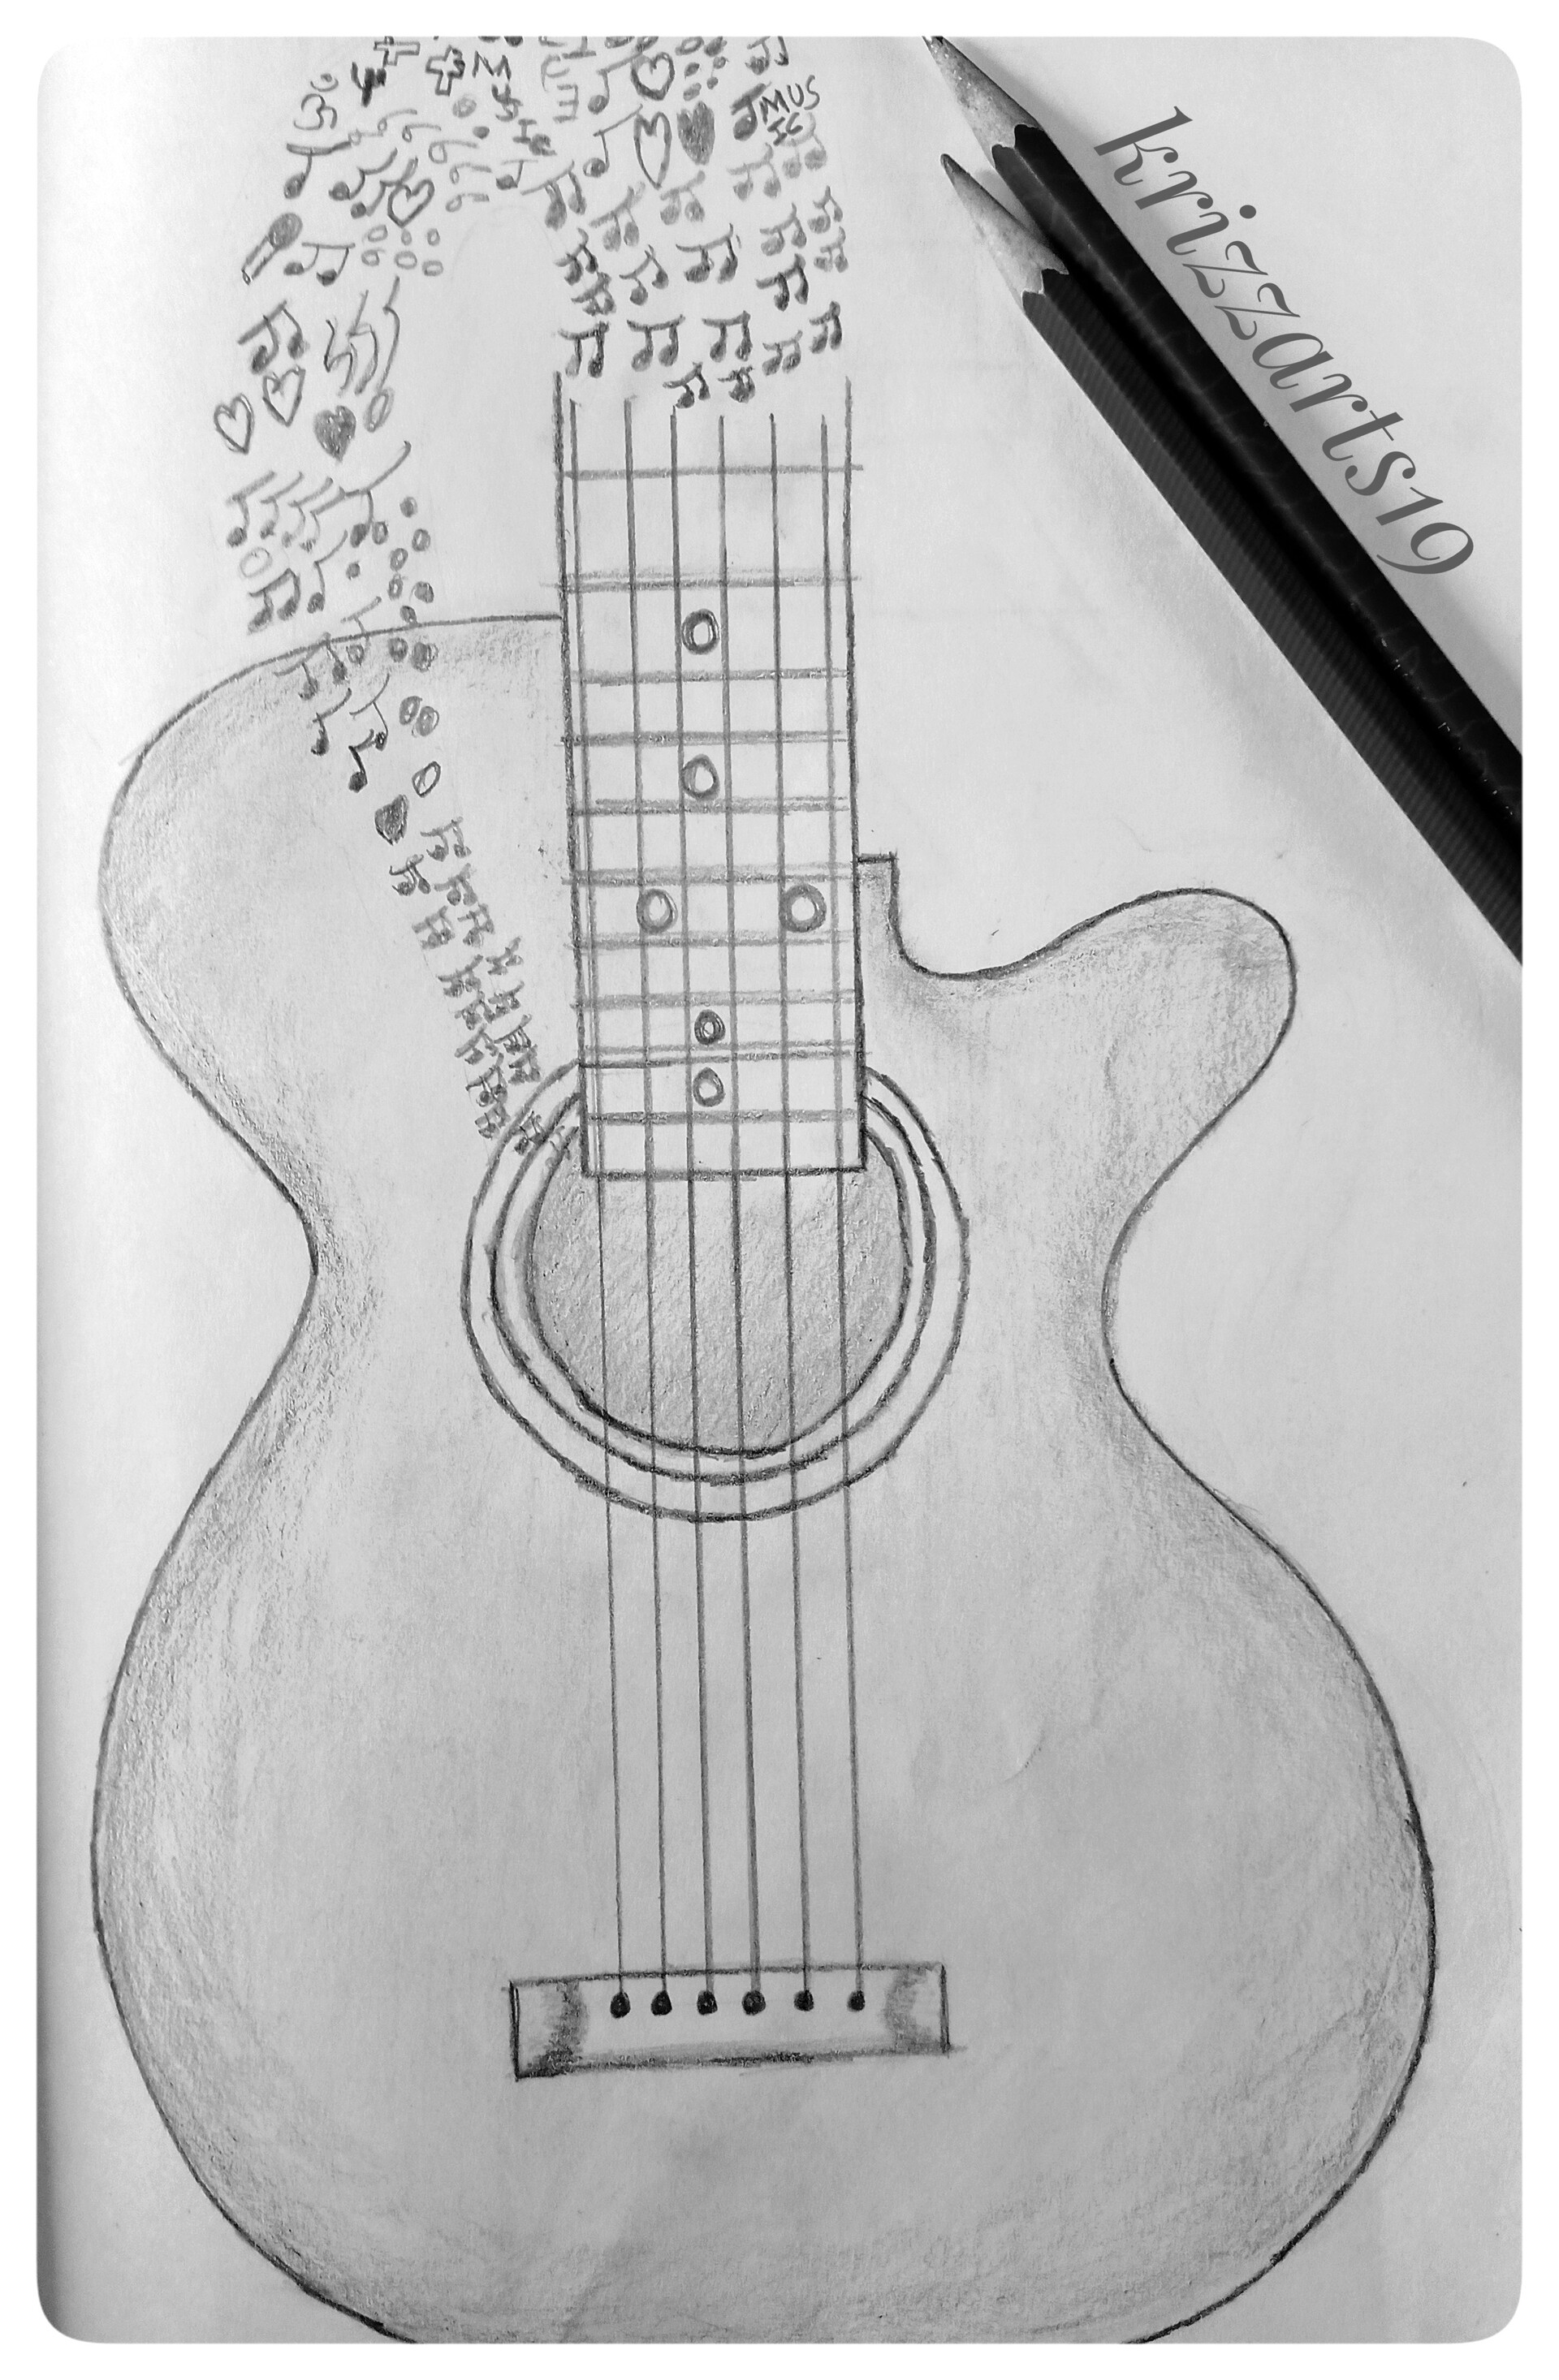 One continous drawing of an acoustic guitar on Craiyon